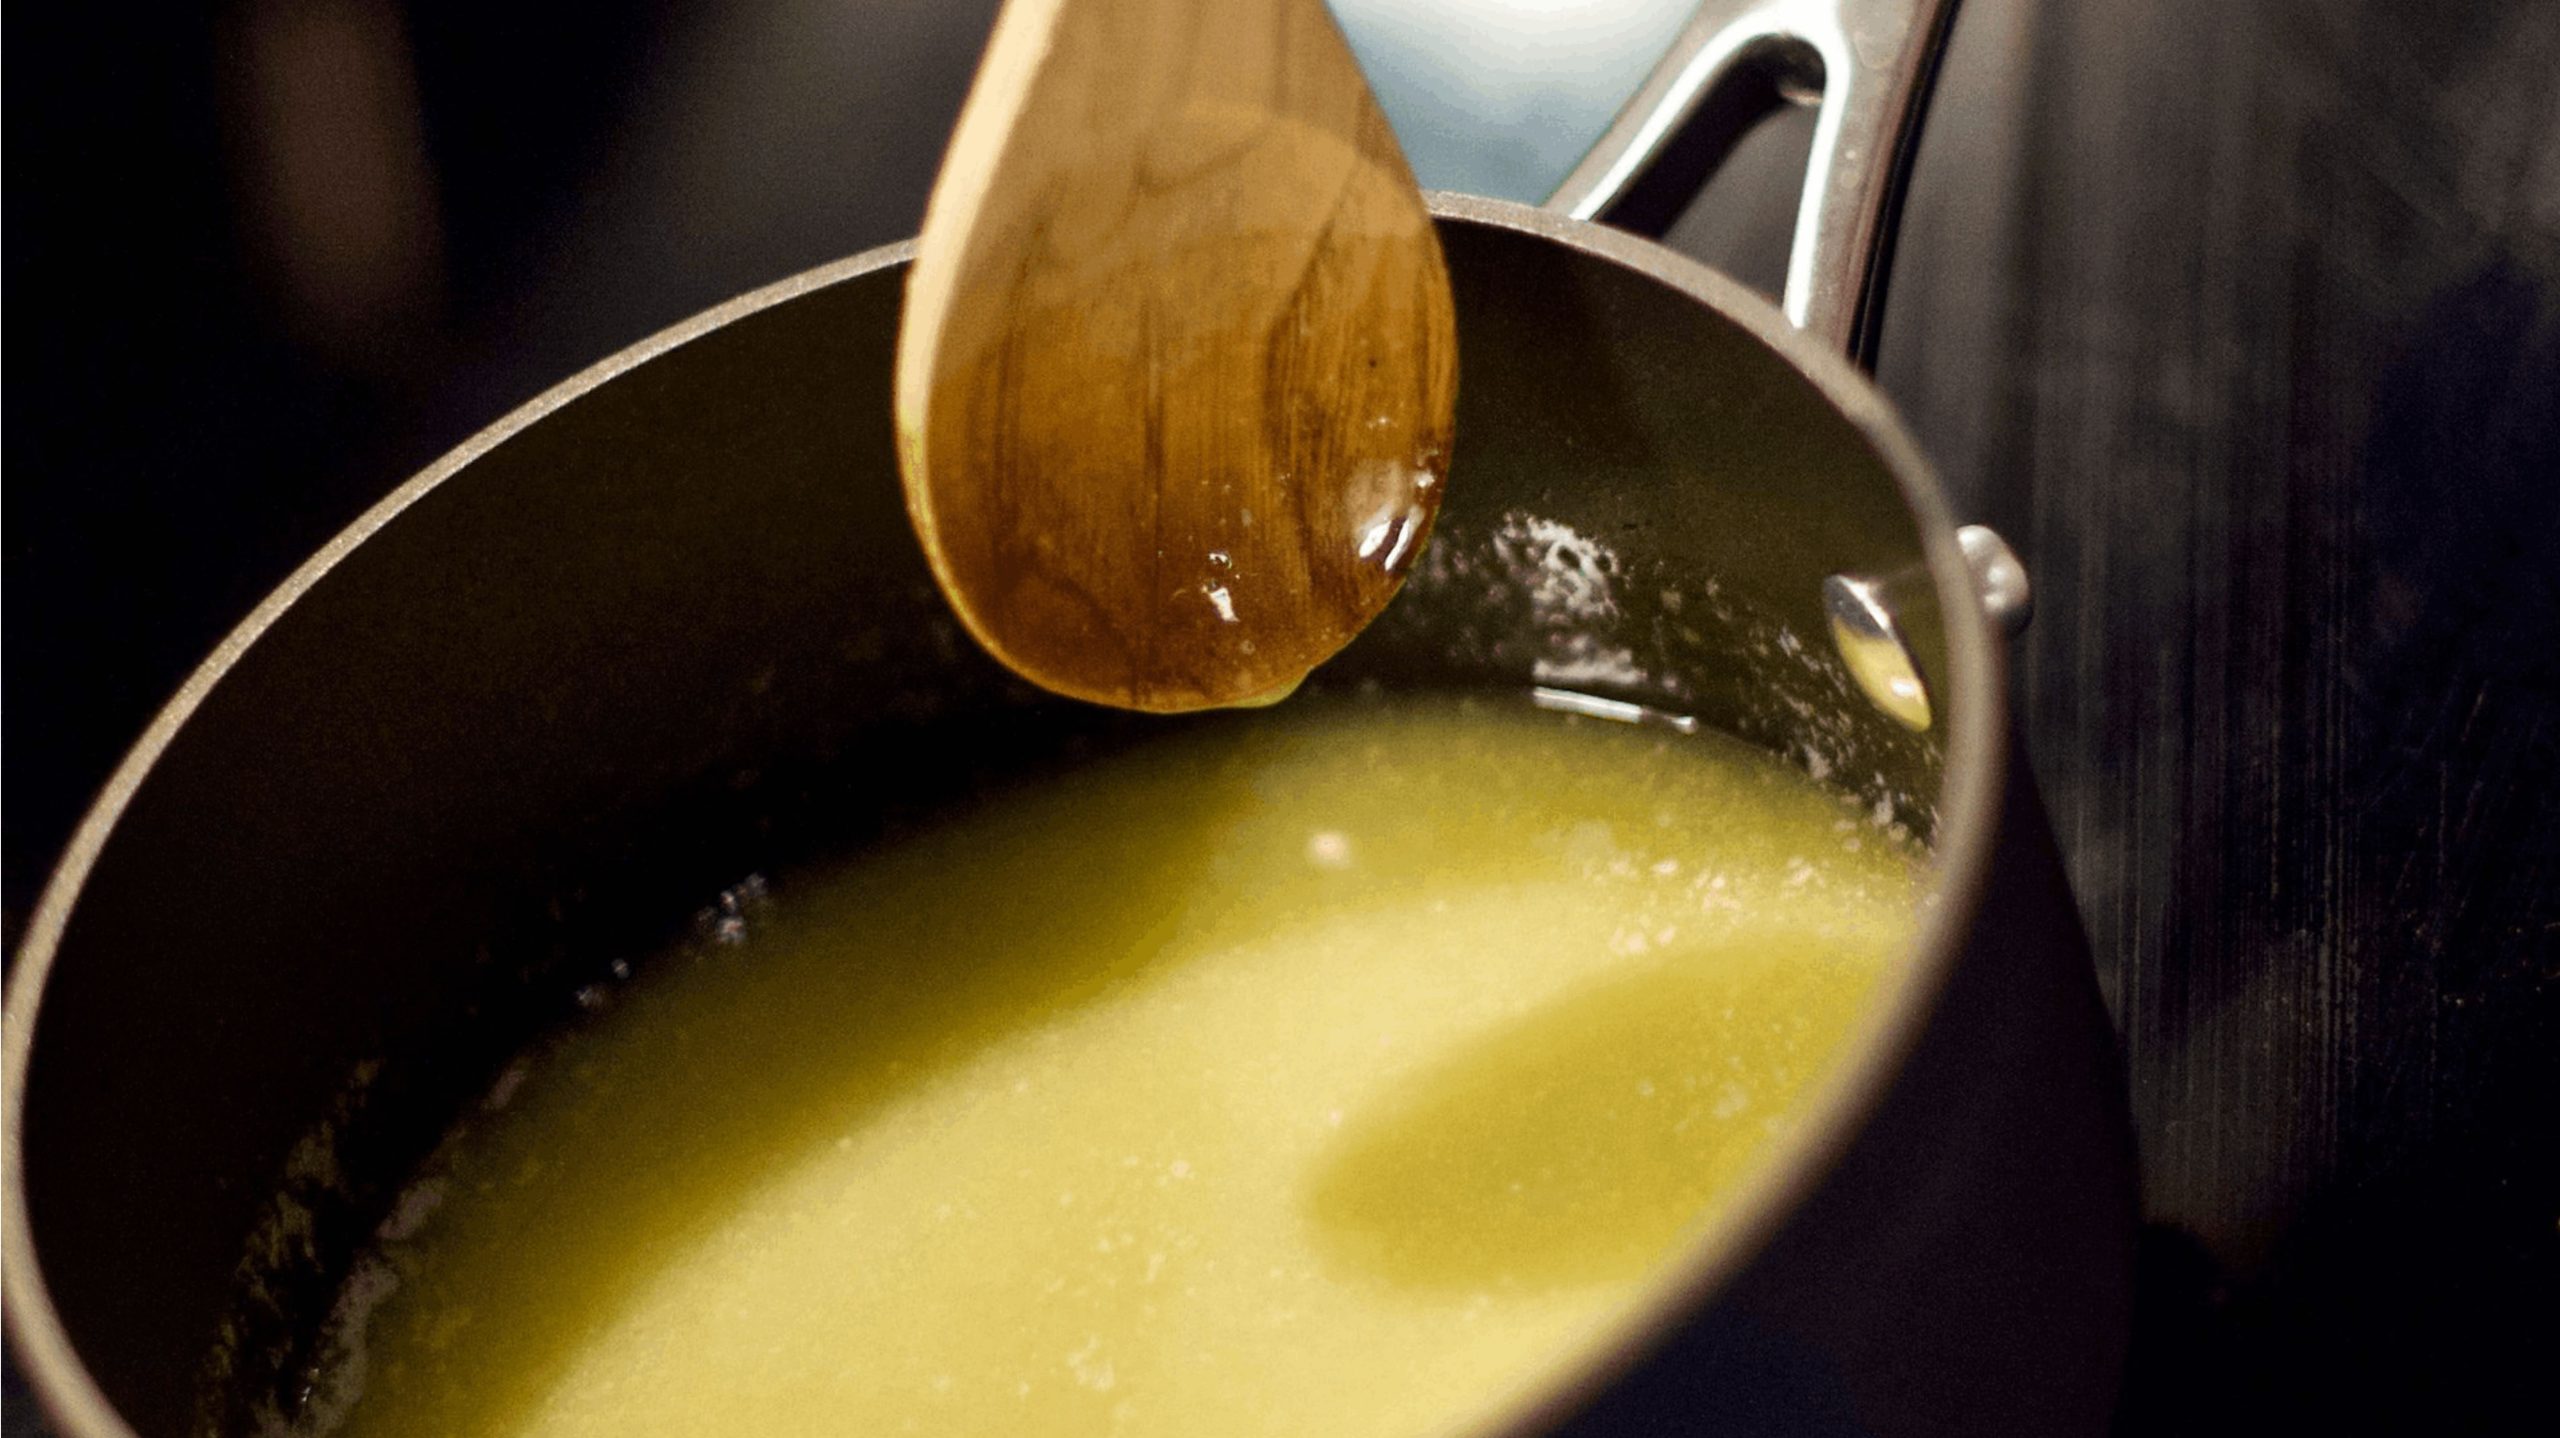 Here it is, the internet's best and easiest recipe on how to make cannabutter. Just follow these instructions and you'll get a fresh and tasty batch of cannabis butter every time!